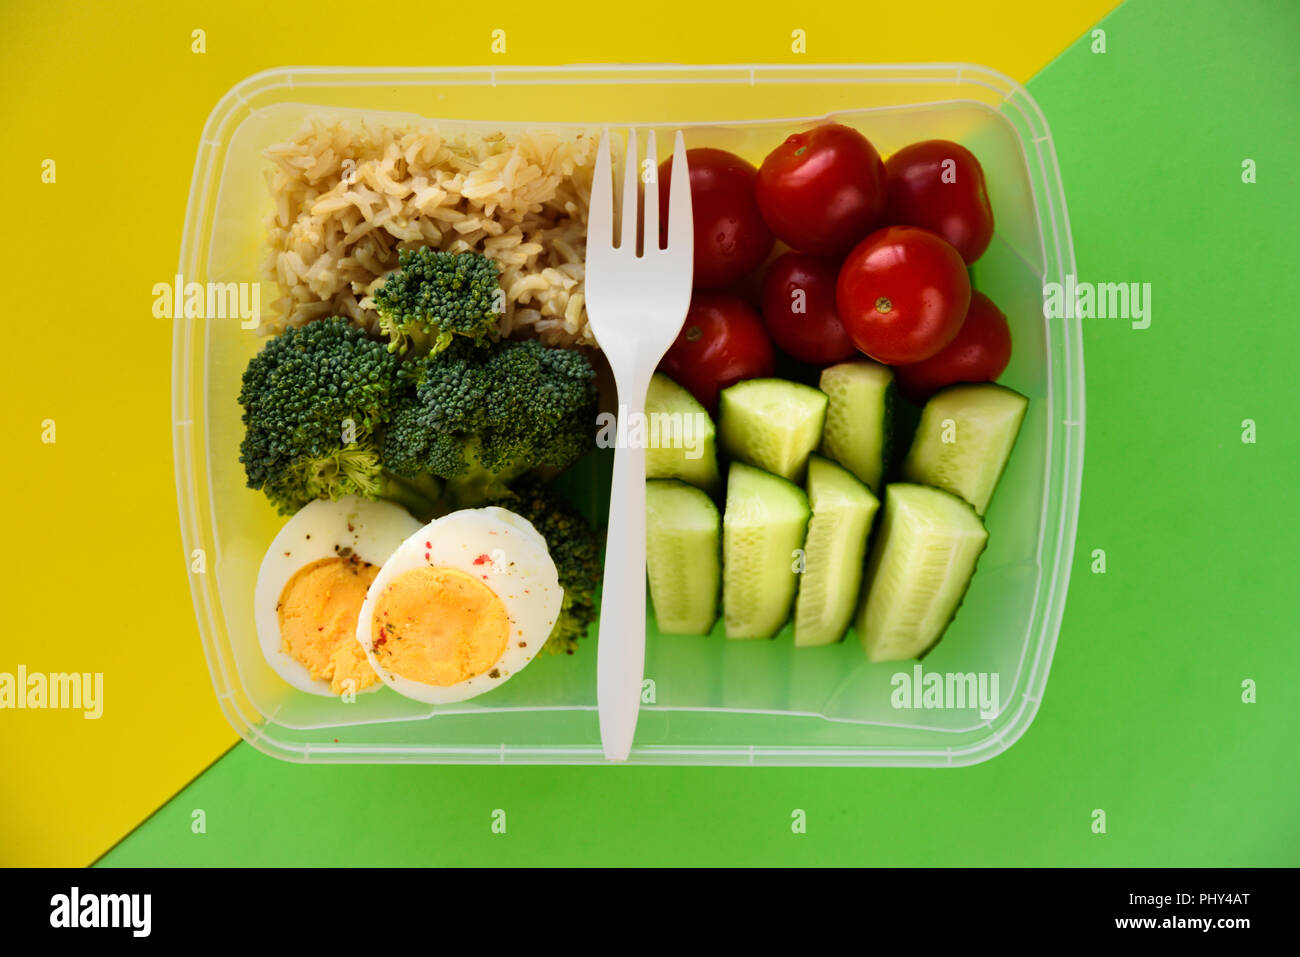 Lunch box with healthy food. Rice, broccoli, tomato, cucumber, eggs, apple and water. On yellow and green background Stock Photo